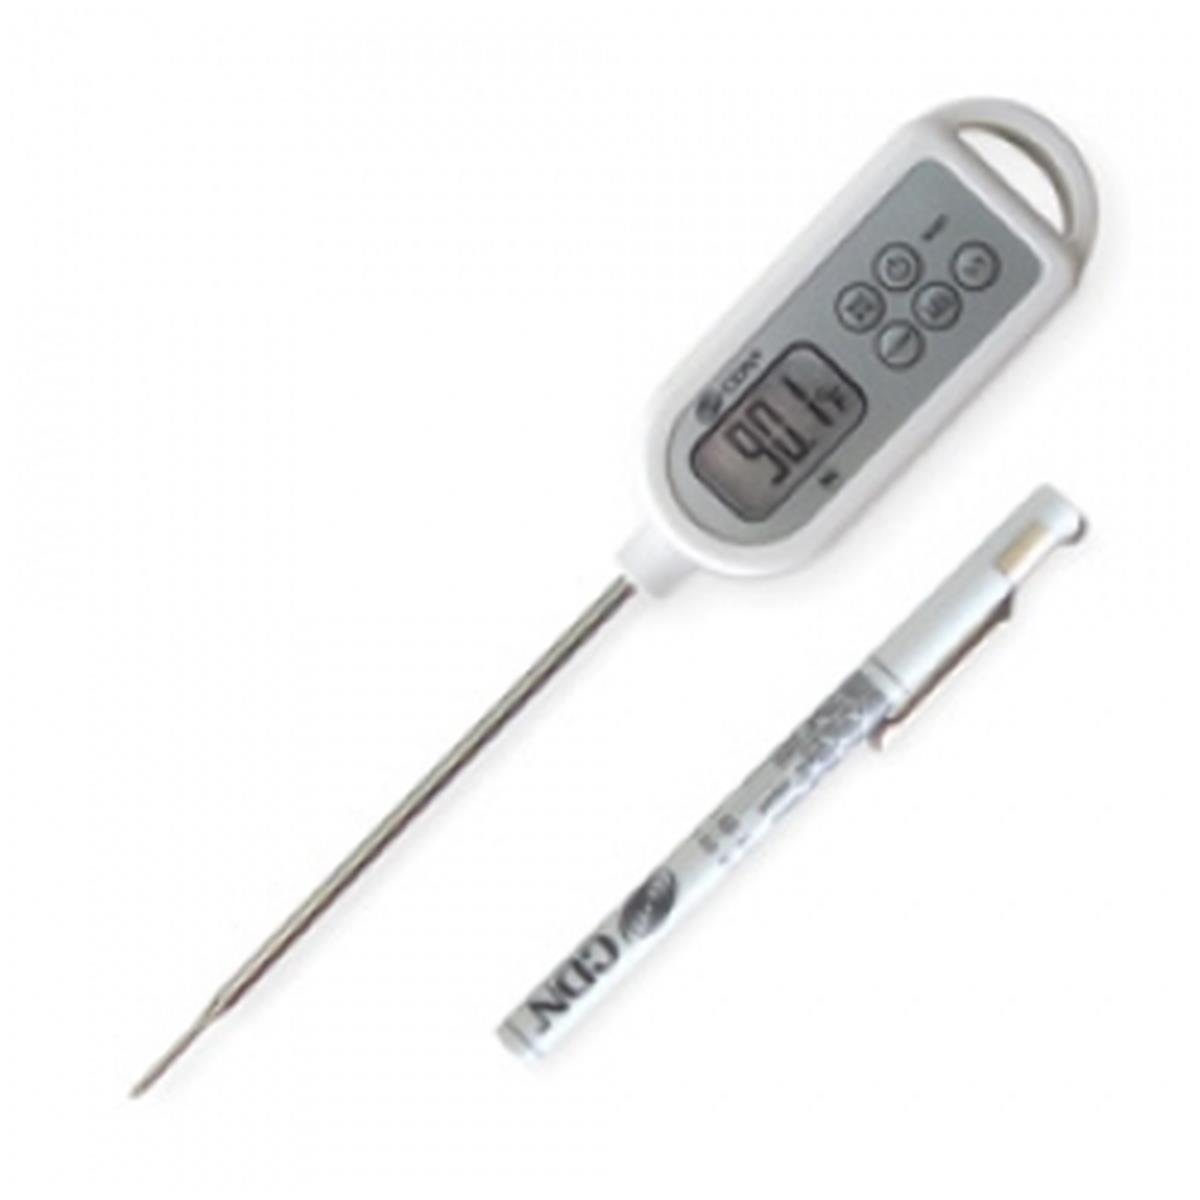 Dtw450 Proaccurate Waterproof Thermometer